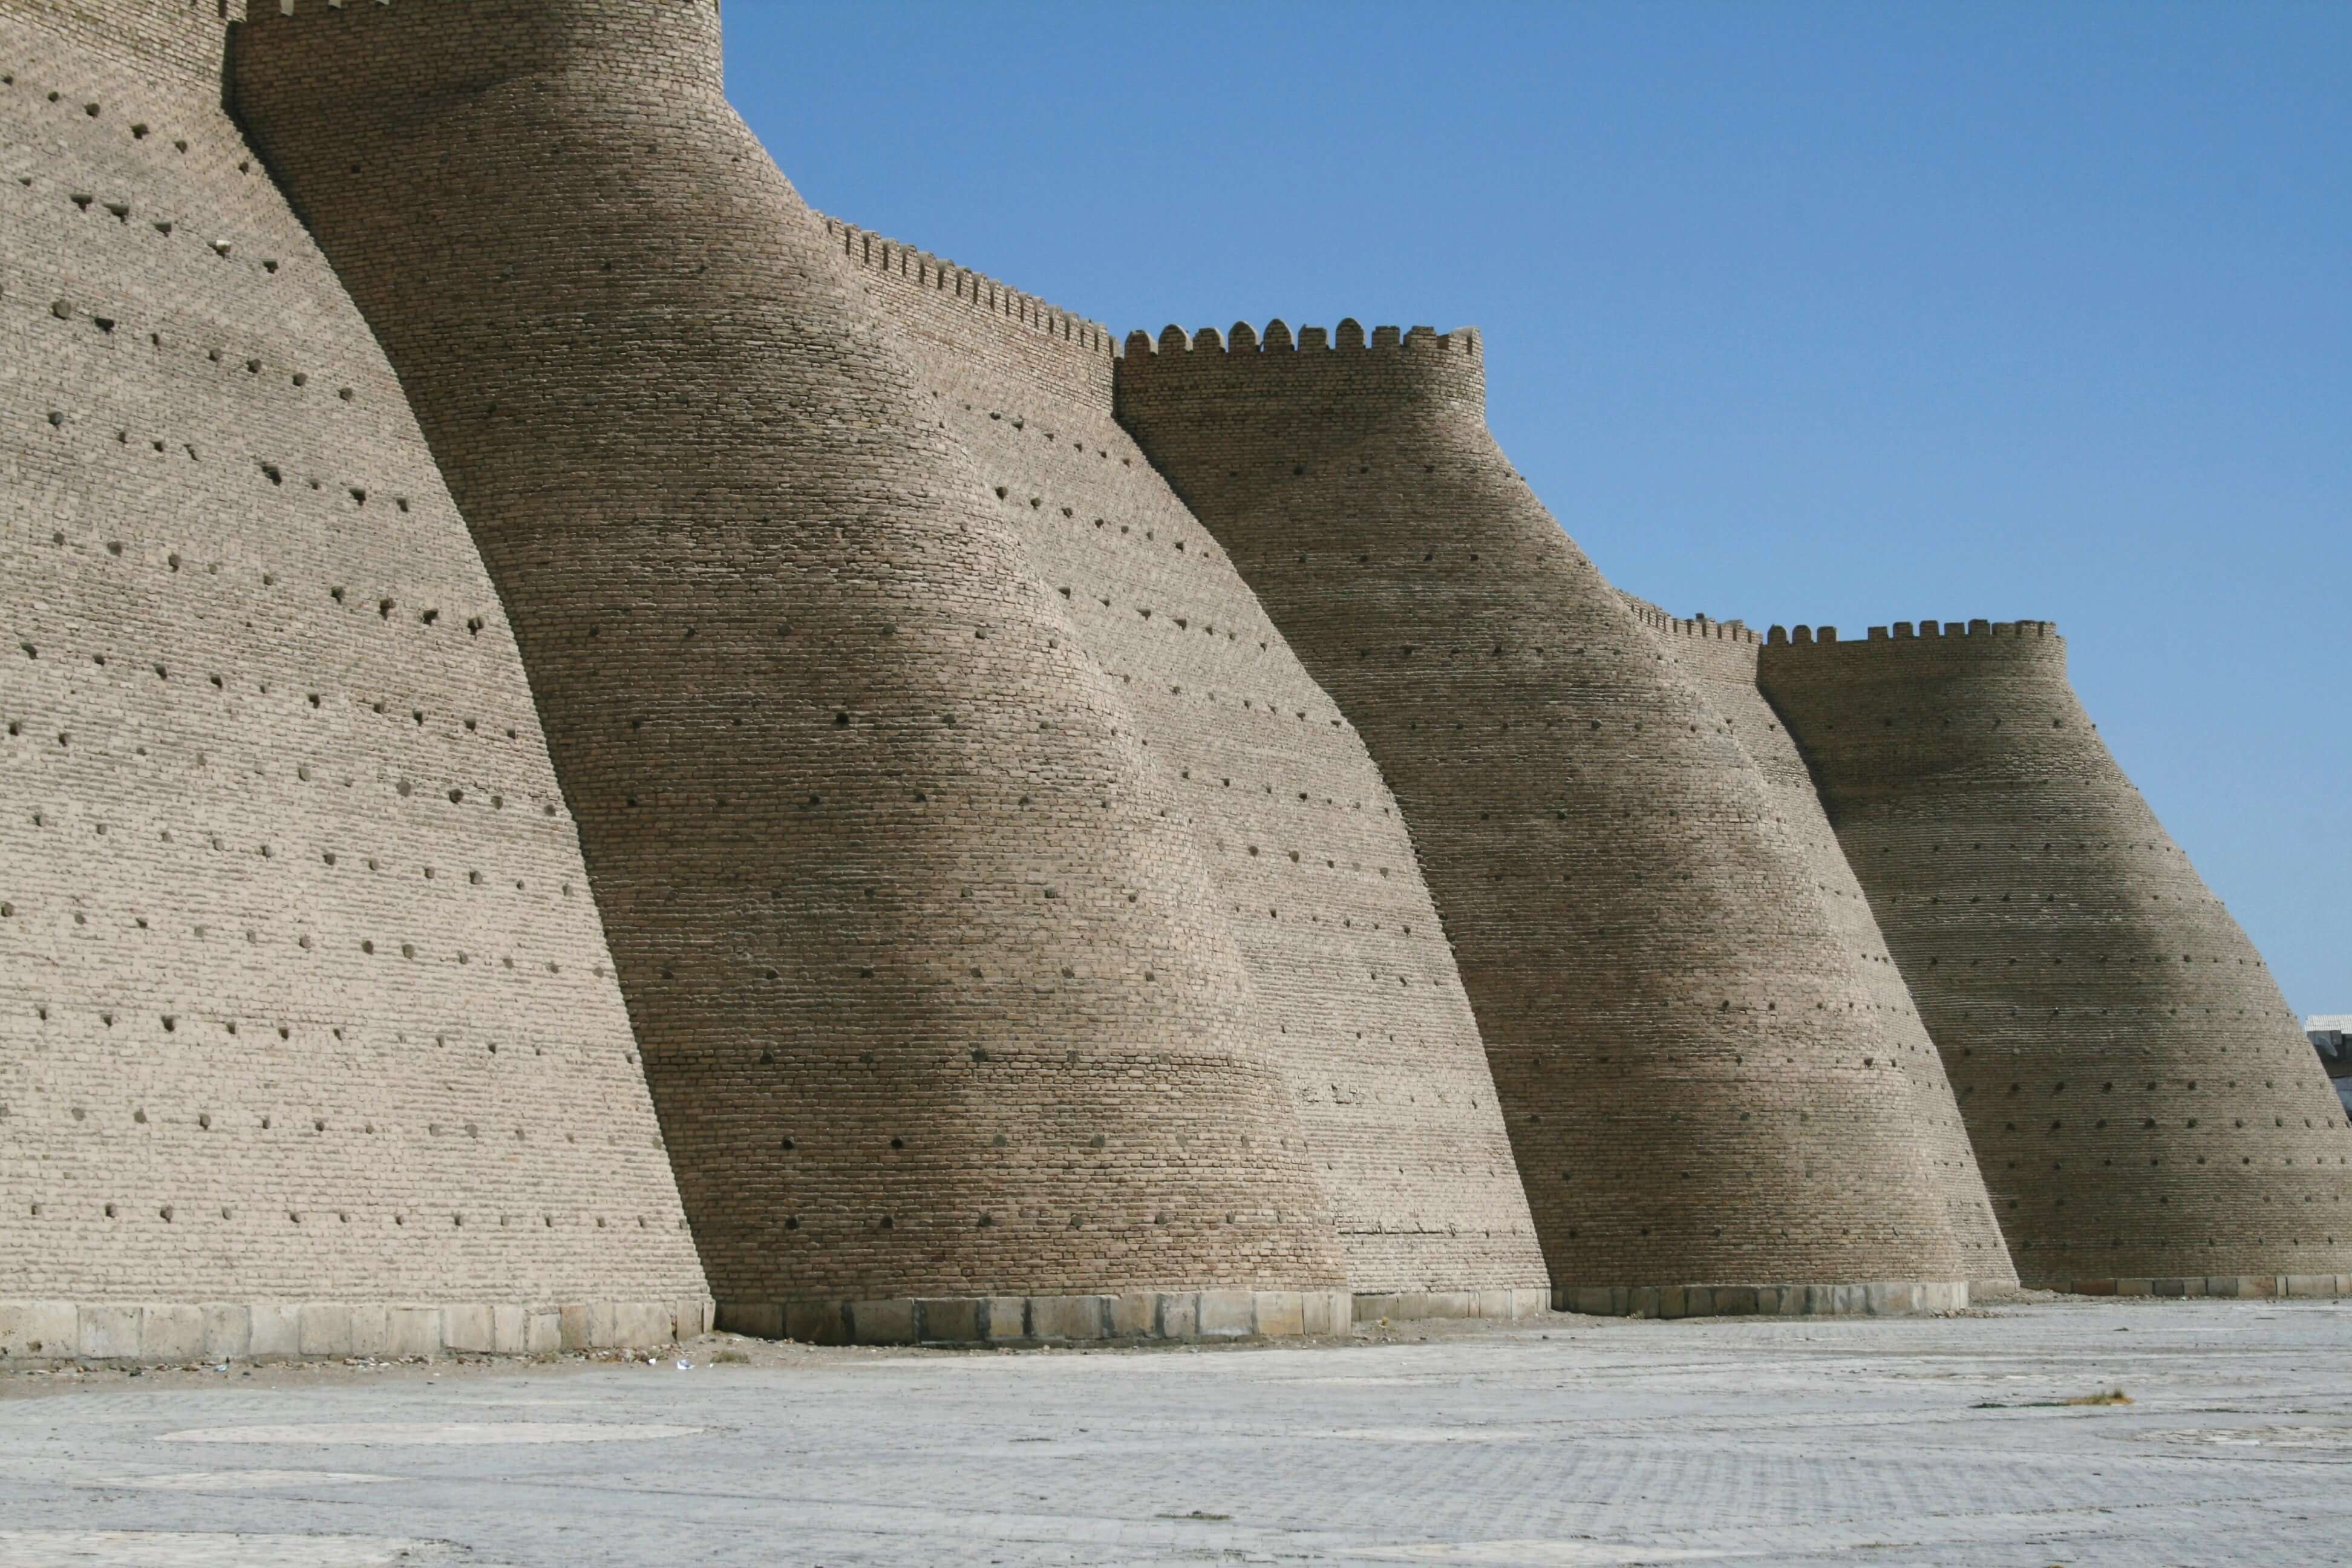 The ancient towns on the Silk road